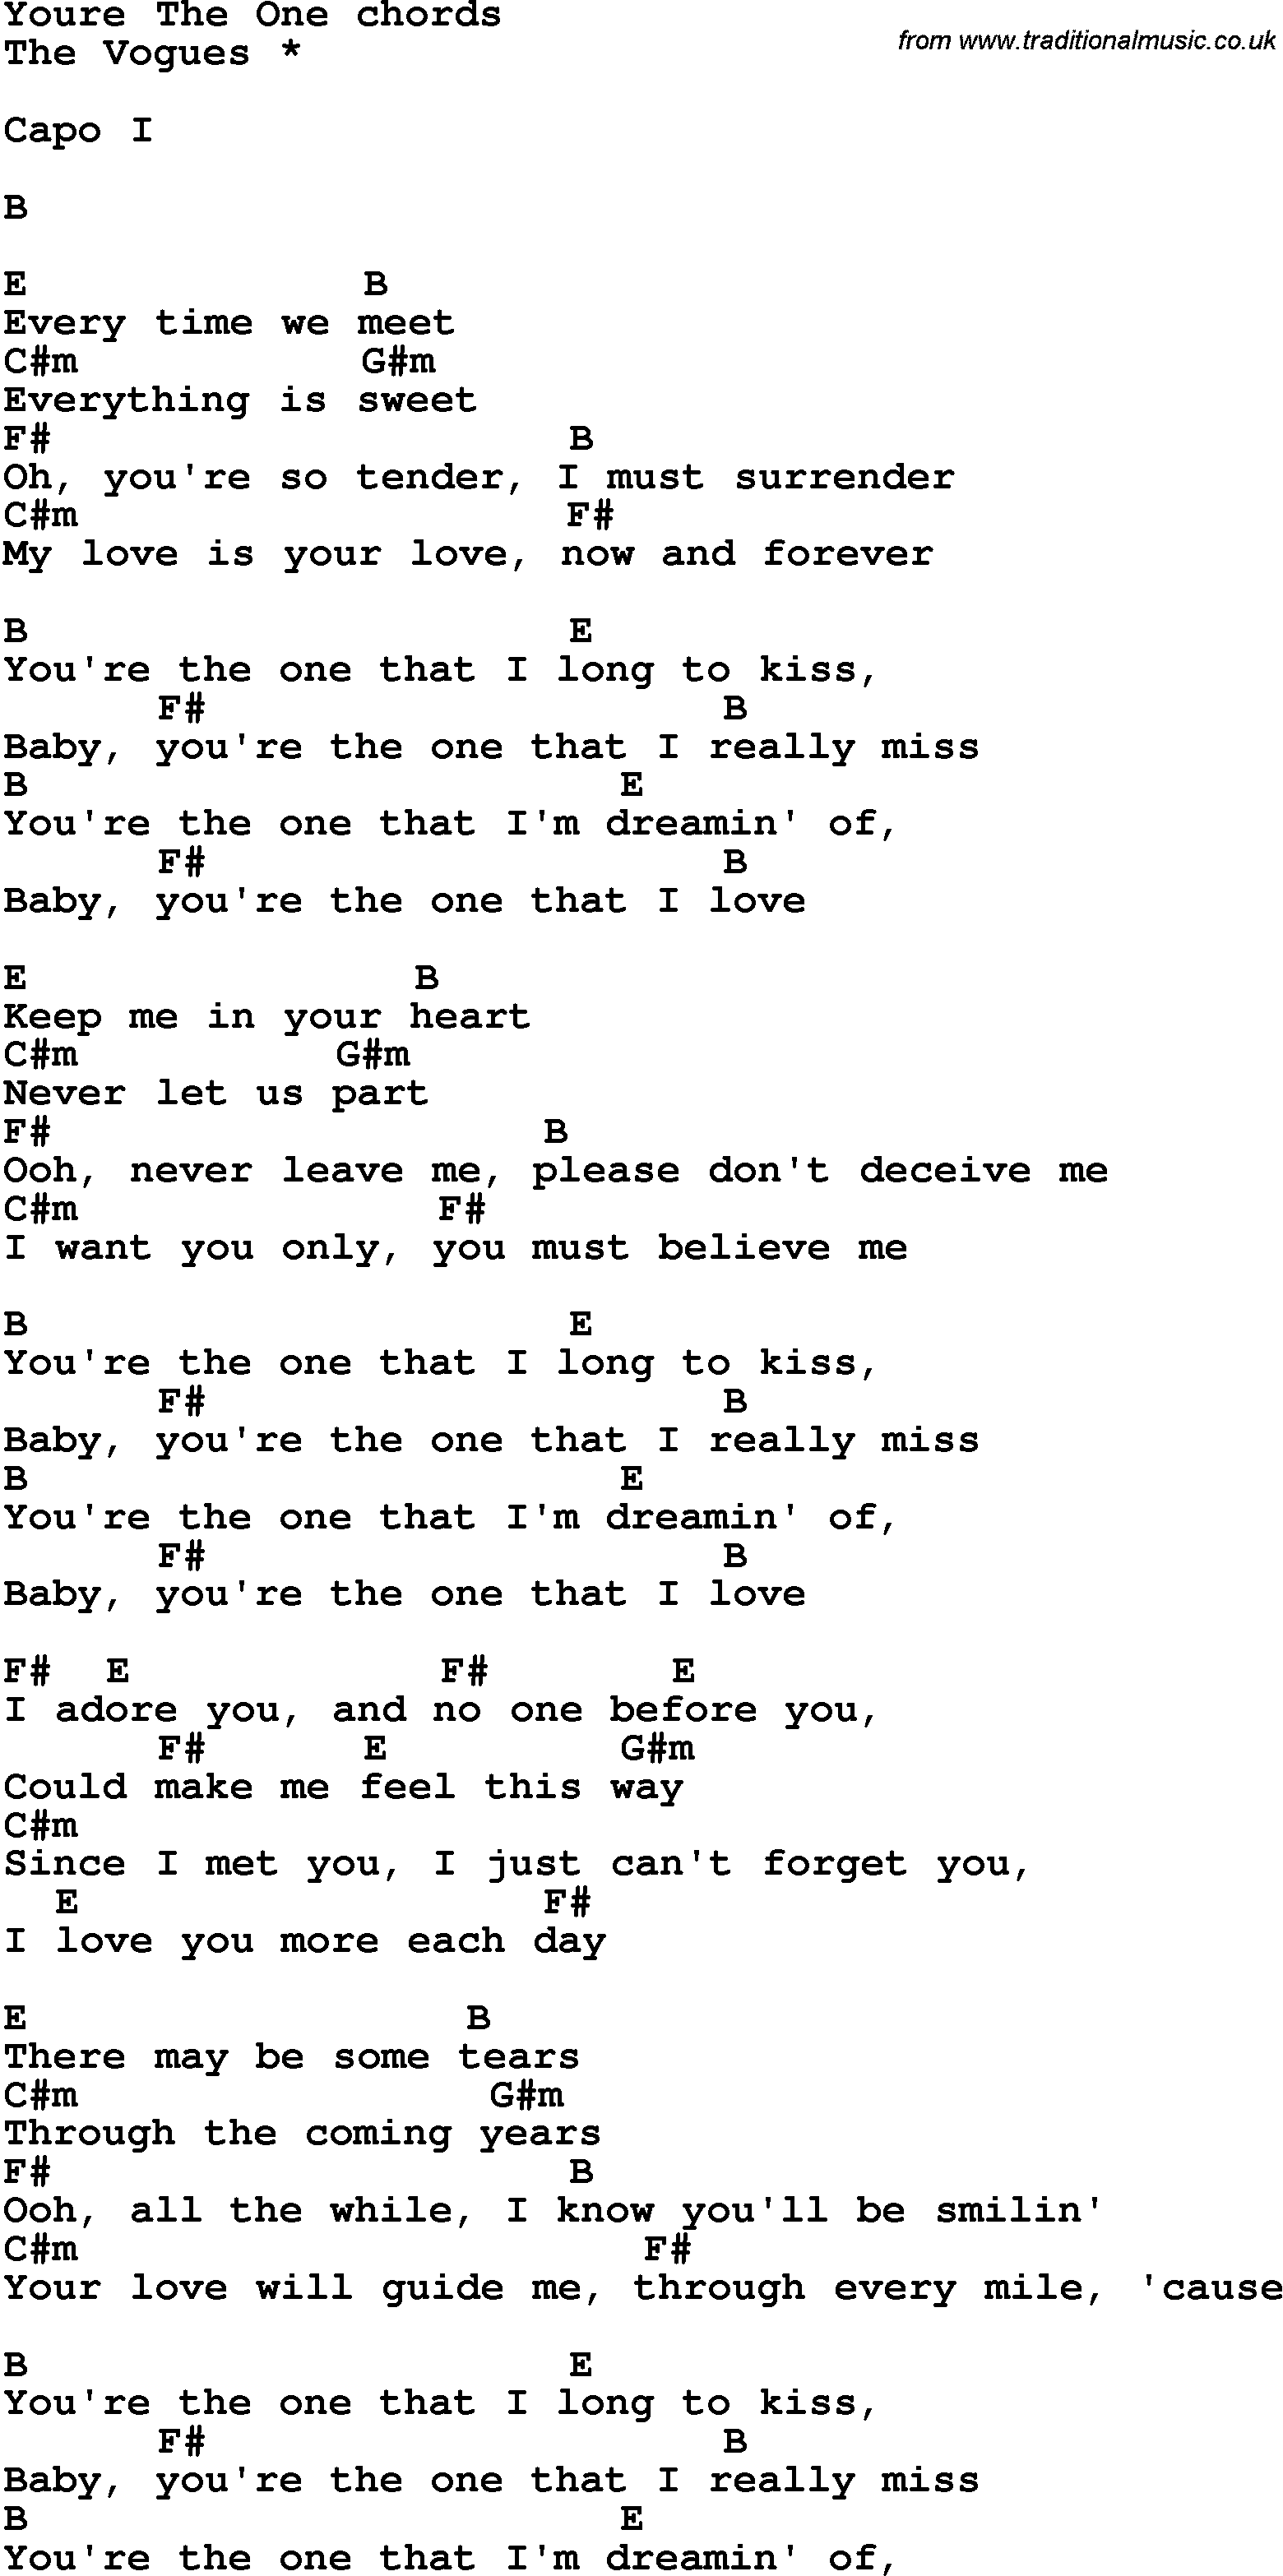 Song Lyrics with guitar chords for You're The One - The Vogues